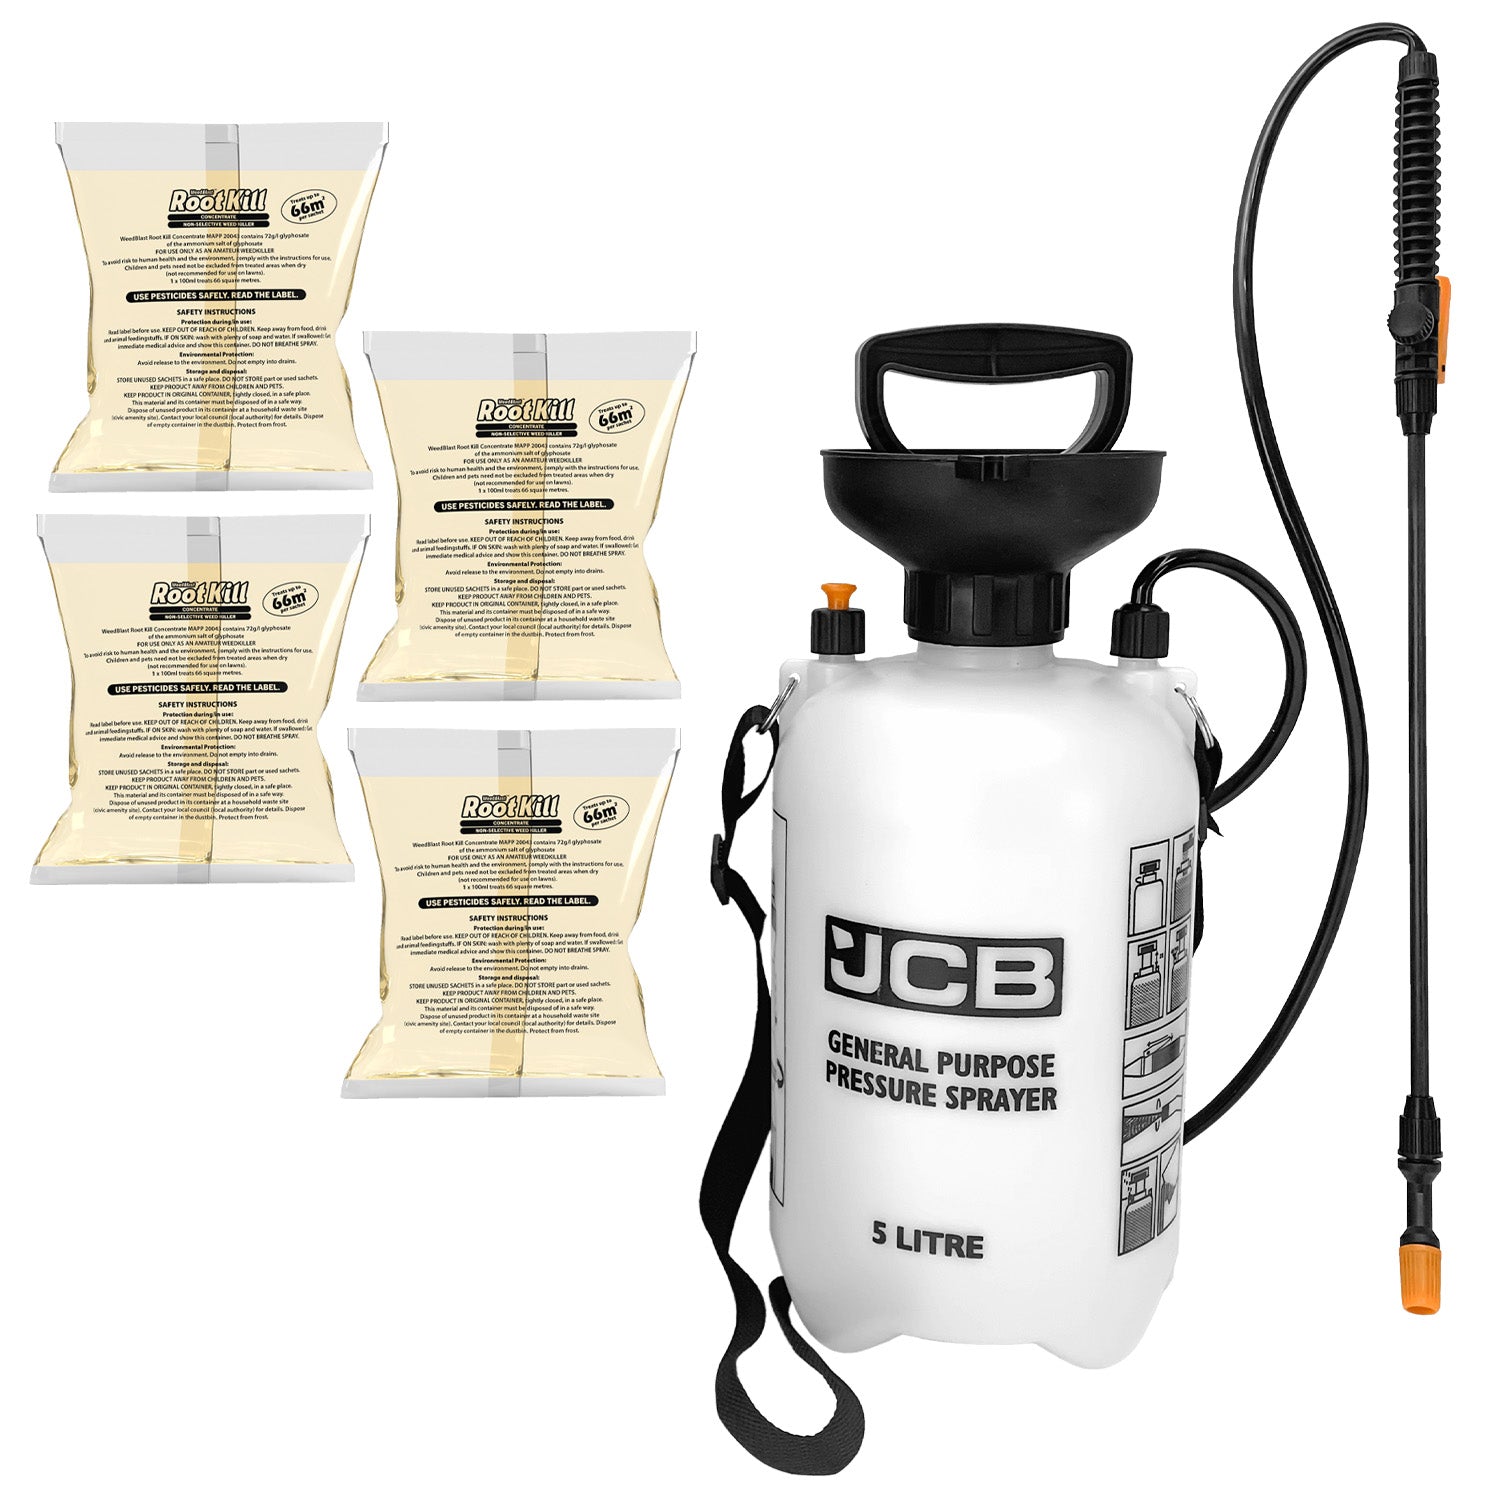 Weedblast Rootkill Concentrated Weedkiller 4 x 100 Sachets with 5L JCB Sprayer